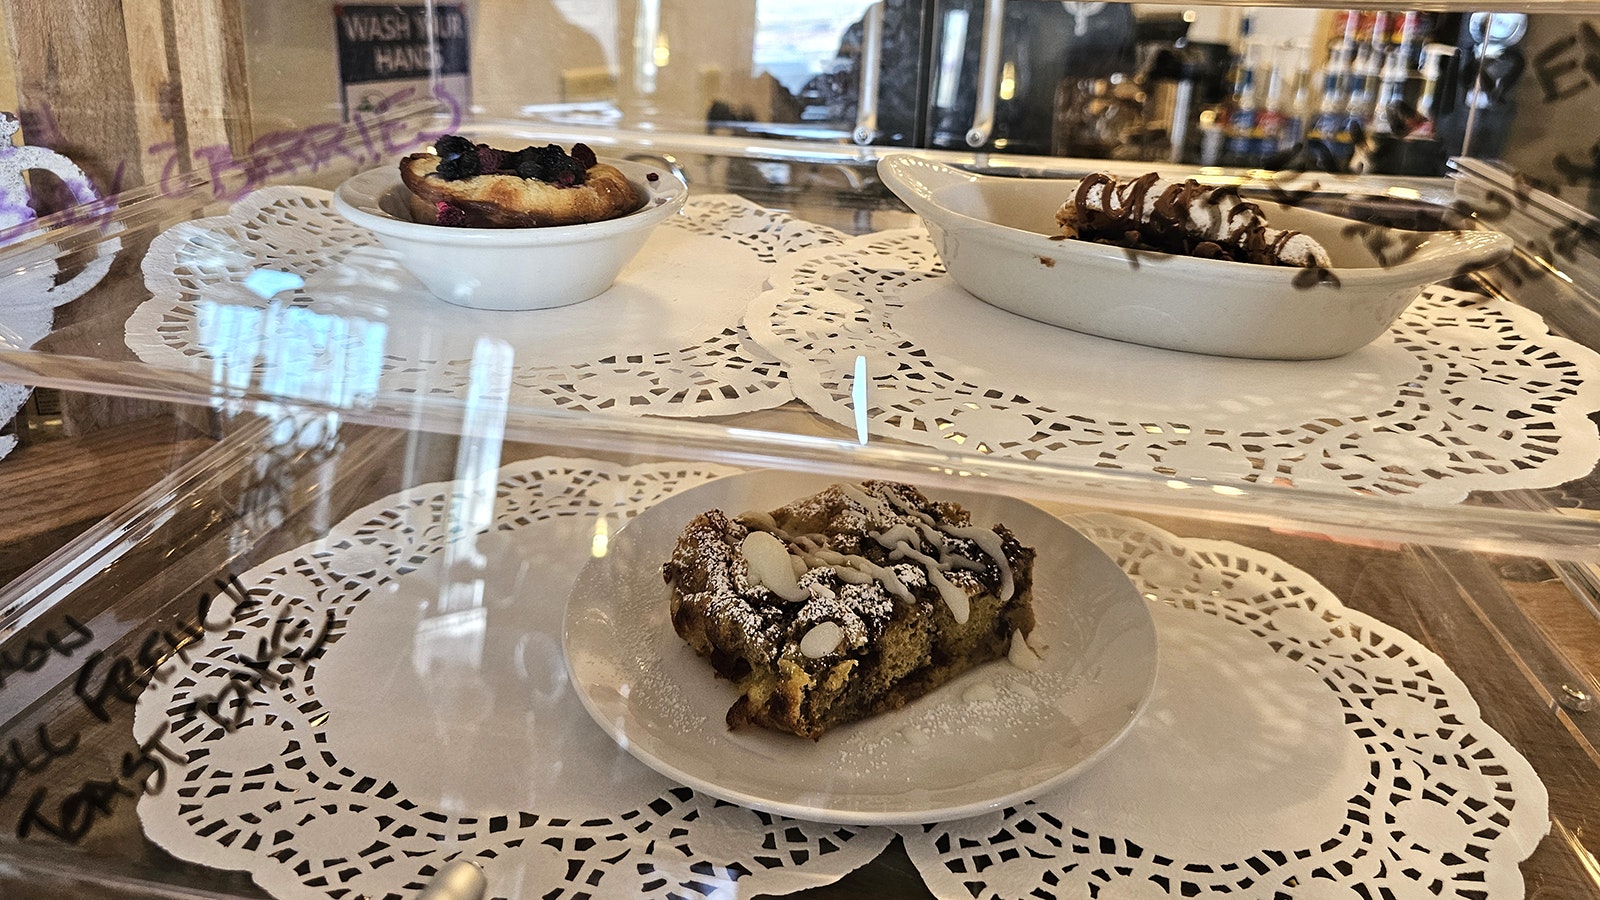 Fresh-baked pastries are available each day.